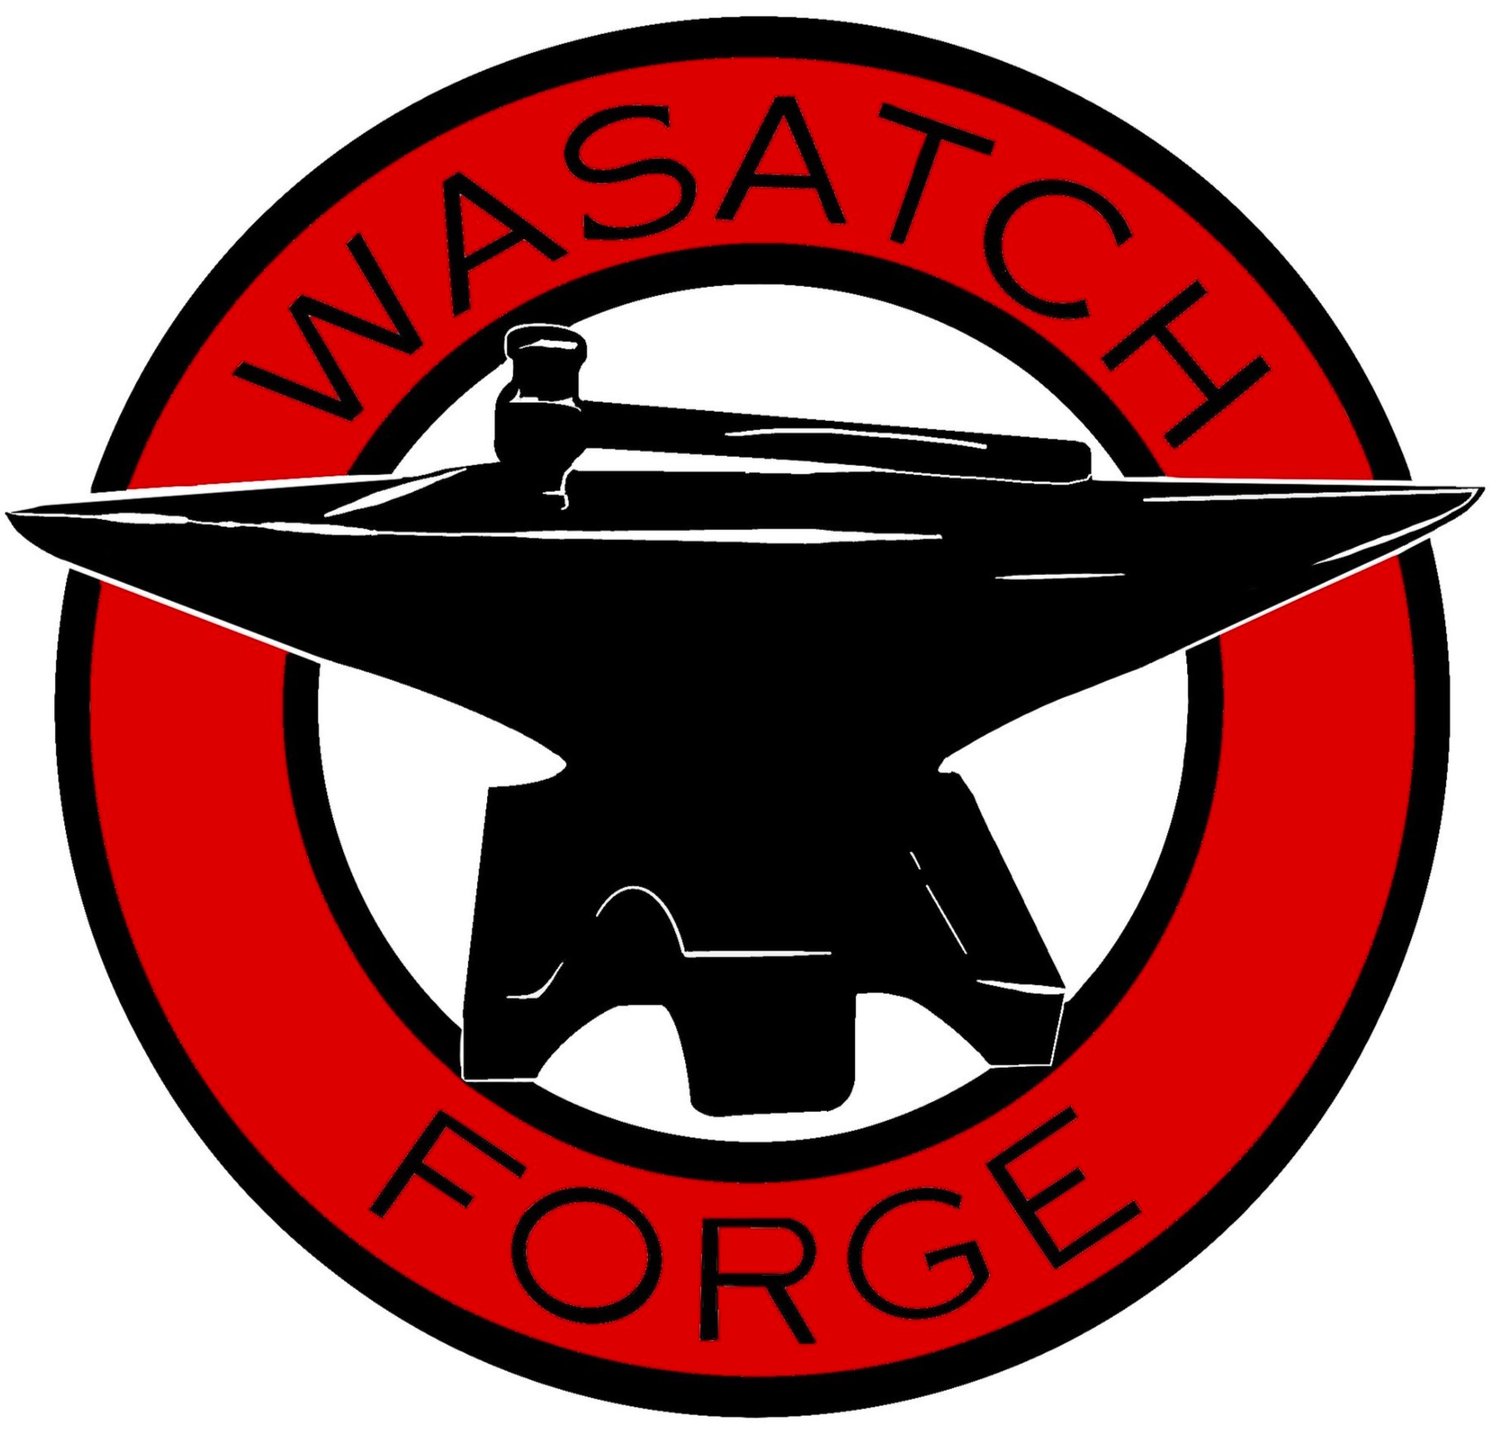 Wasatch Forge